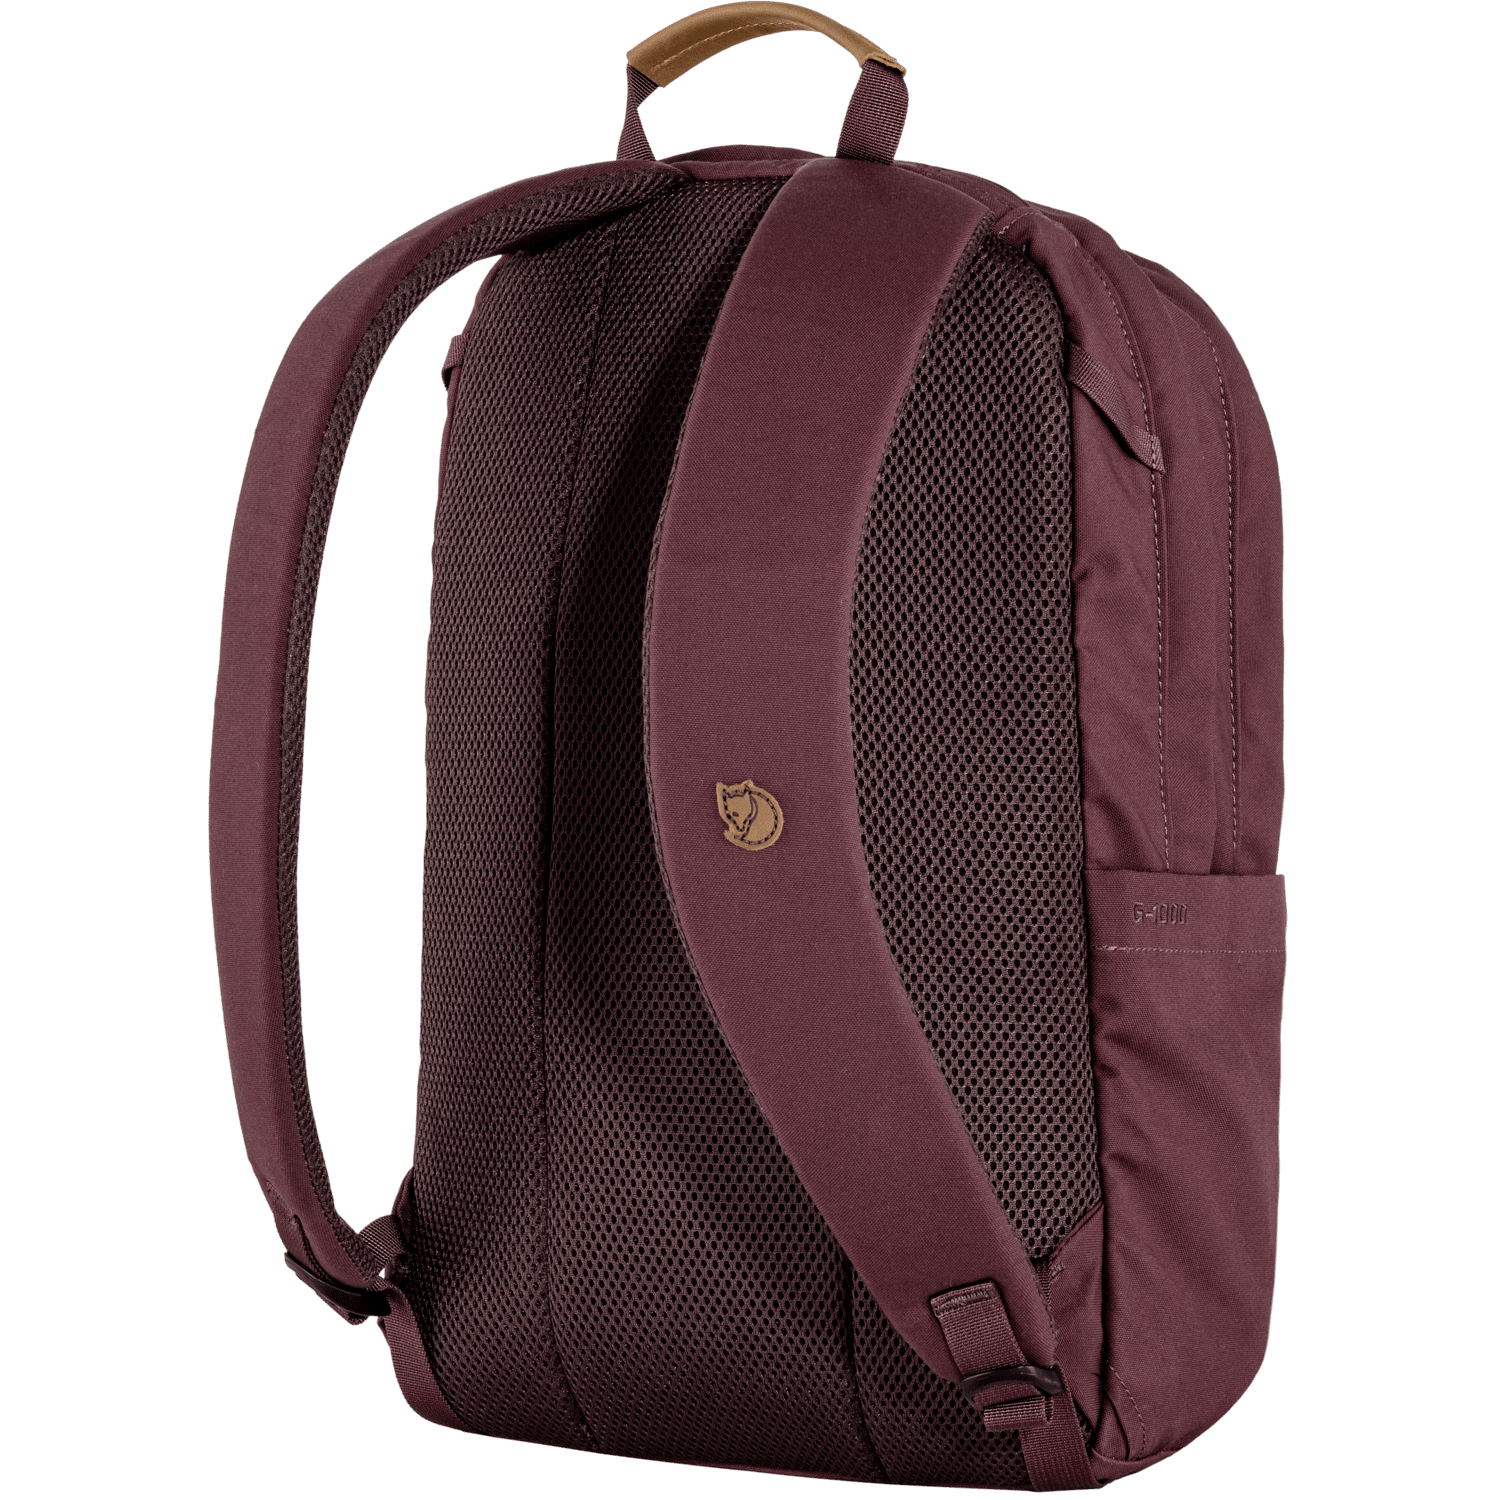 Fjällräven Räven 20l Backpack - Recycled Polyester & Organic Cotton Port Bags